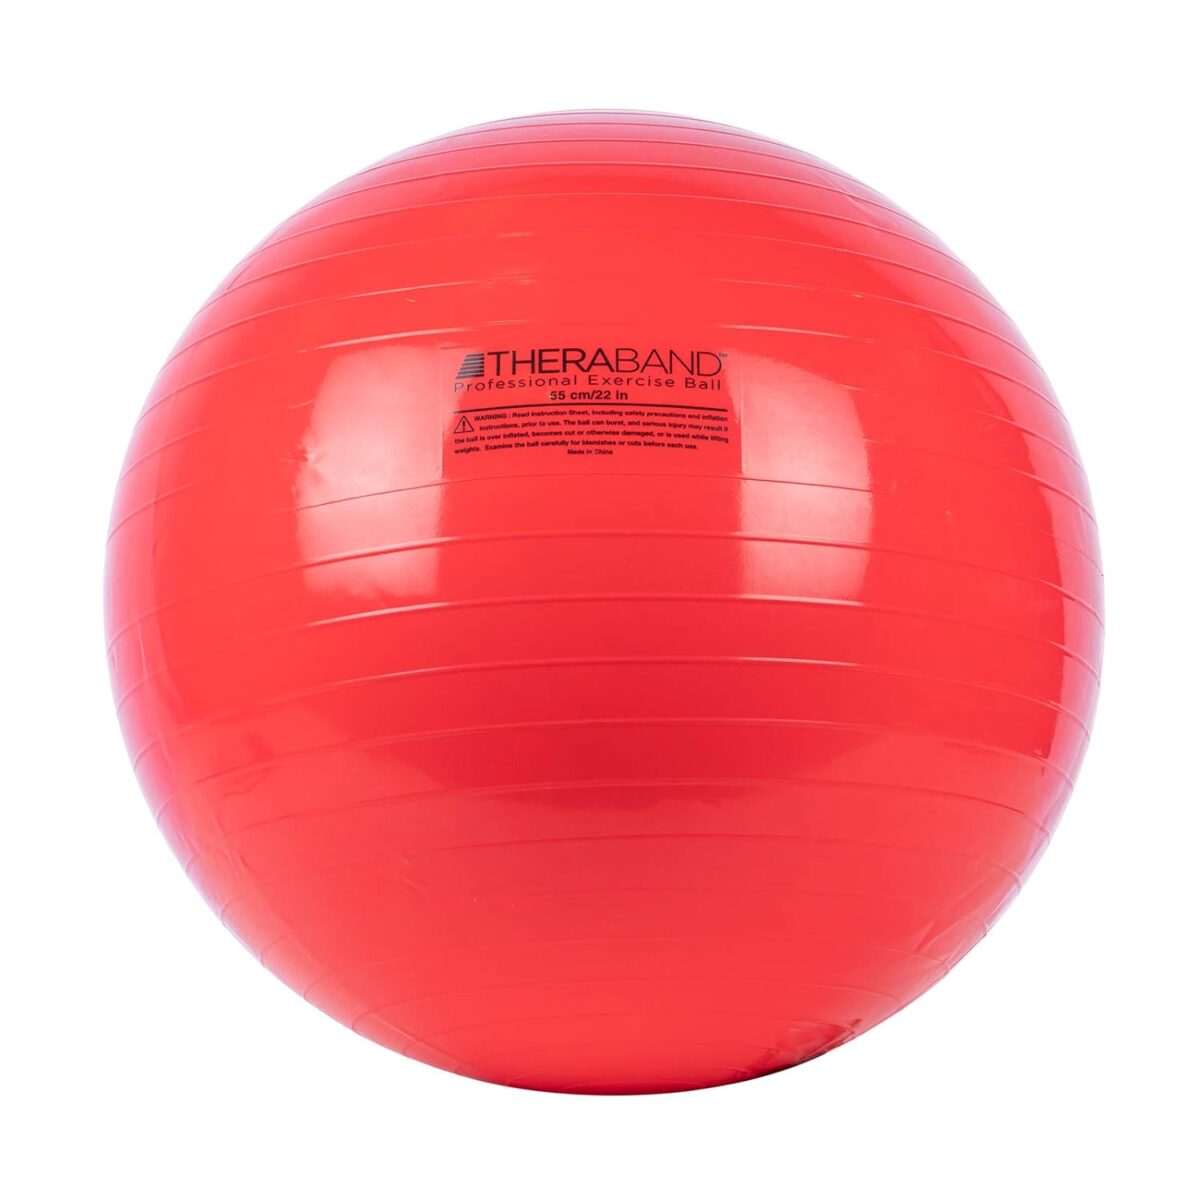 Featured Image for THERABAND Exercise Ball, Stability Ball with 55 cm Diameter for Athletes 5’1″ to 5’6″ Tall, Standard Fitness Ball for Posture, Balance, Yoga, Pilates, Core, & Rehab, Red